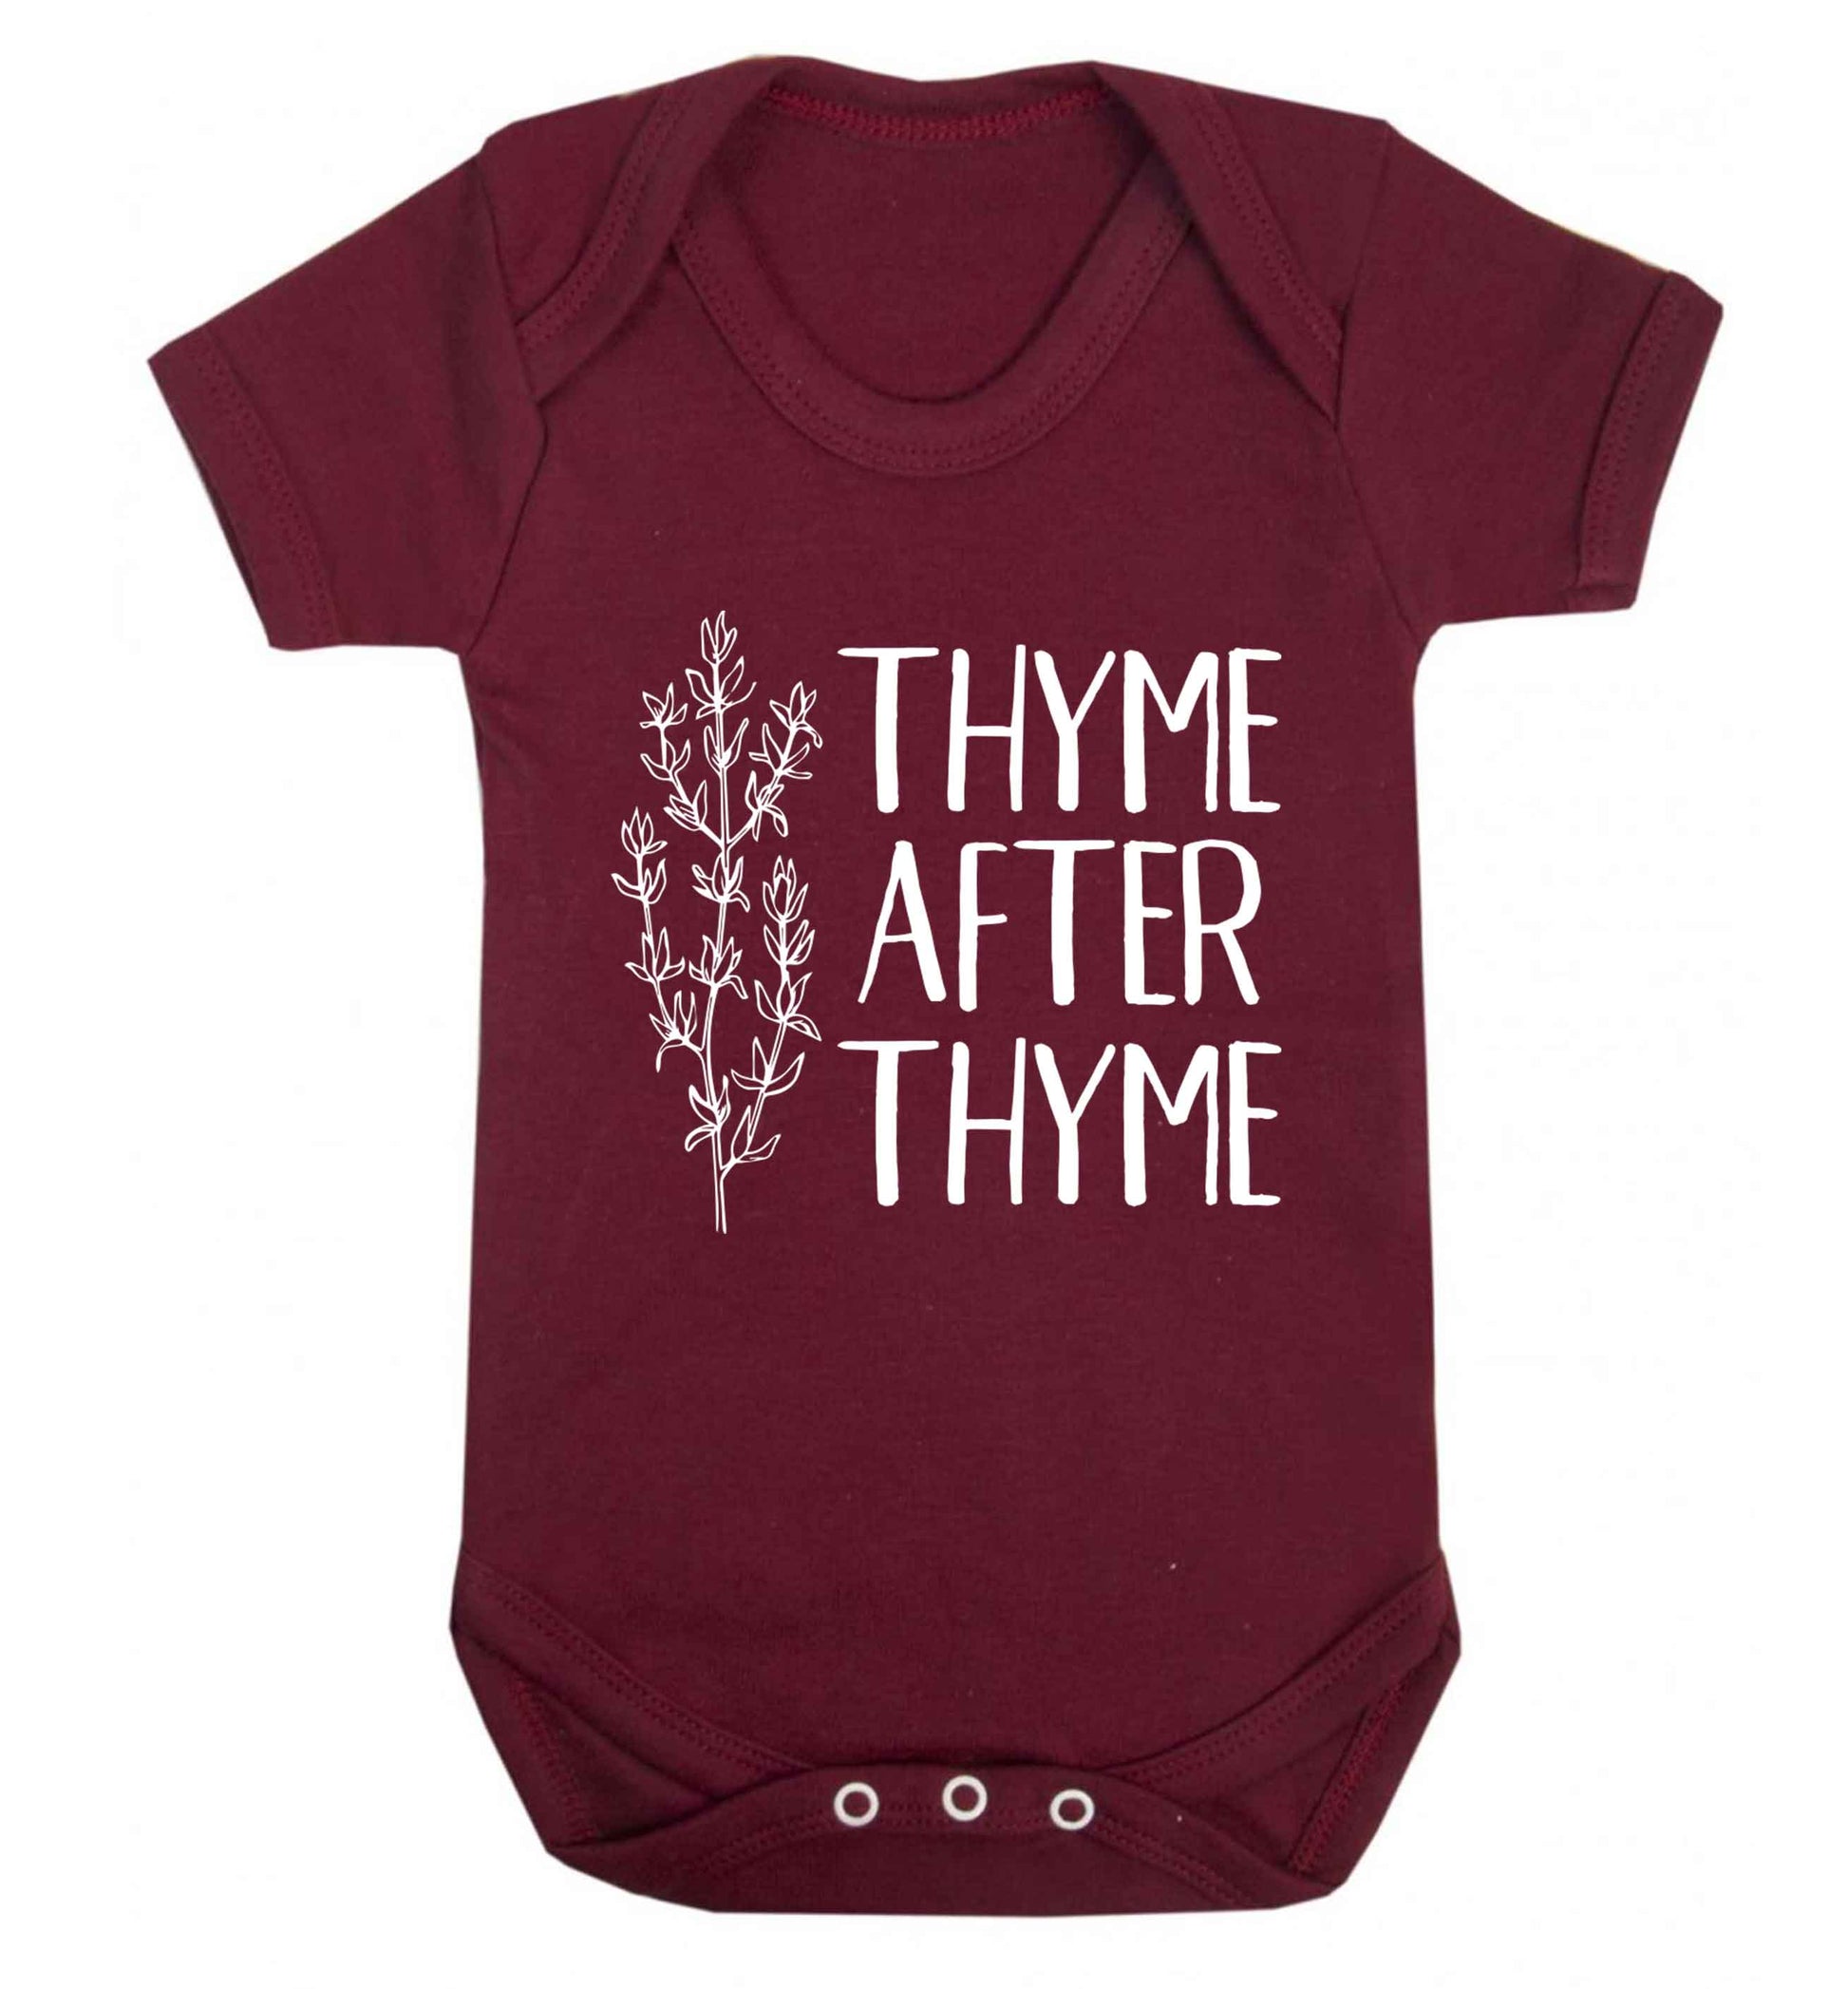 Thyme after thyme Baby Vest maroon 18-24 months